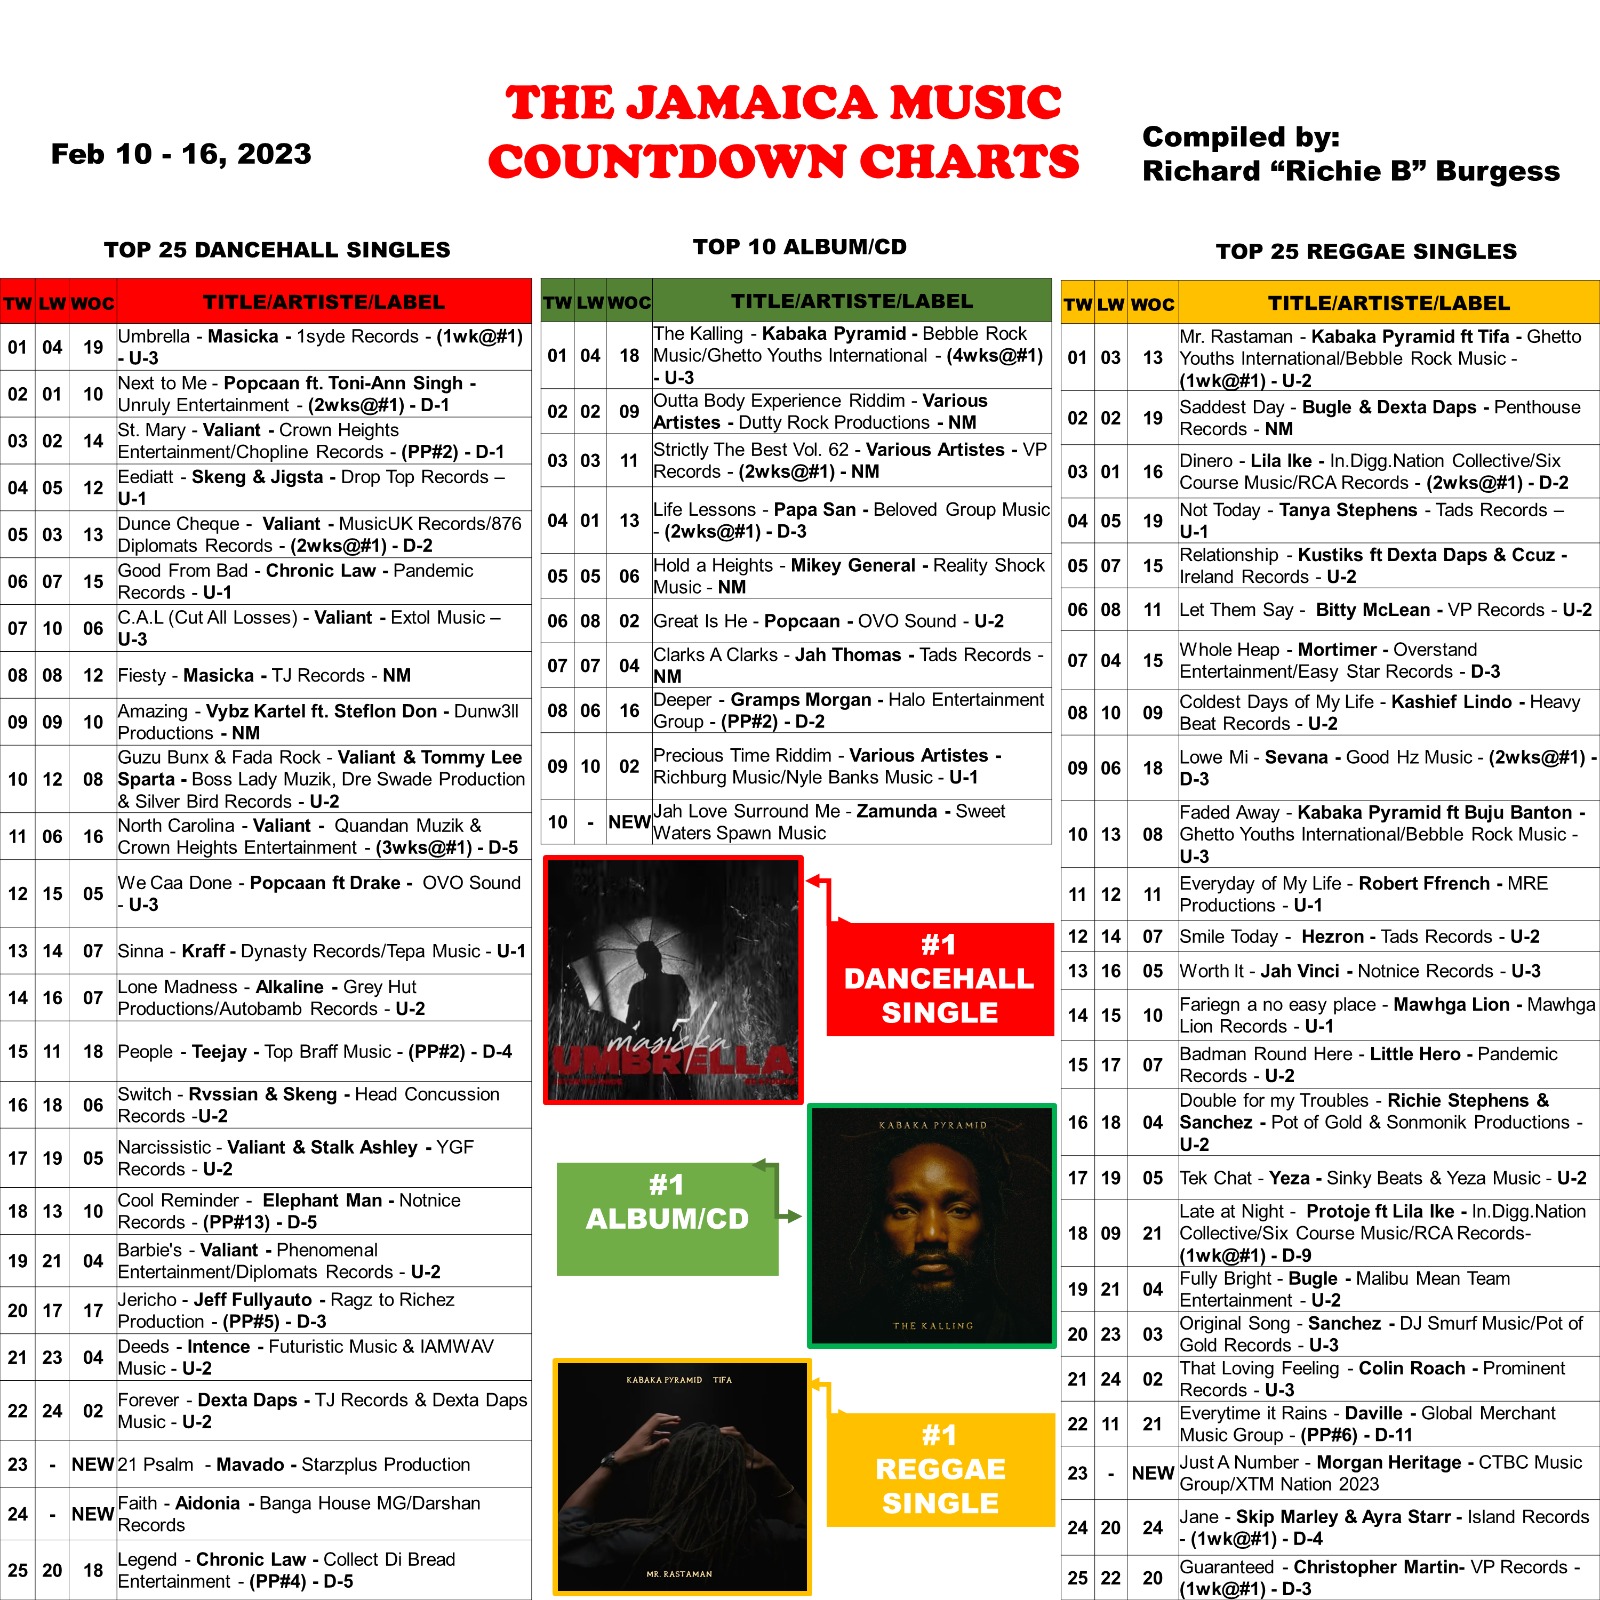 The Jamaica Music Countdown Charts compile the top Dancehall and Reggae songs in Jamaica on a weekly basis.